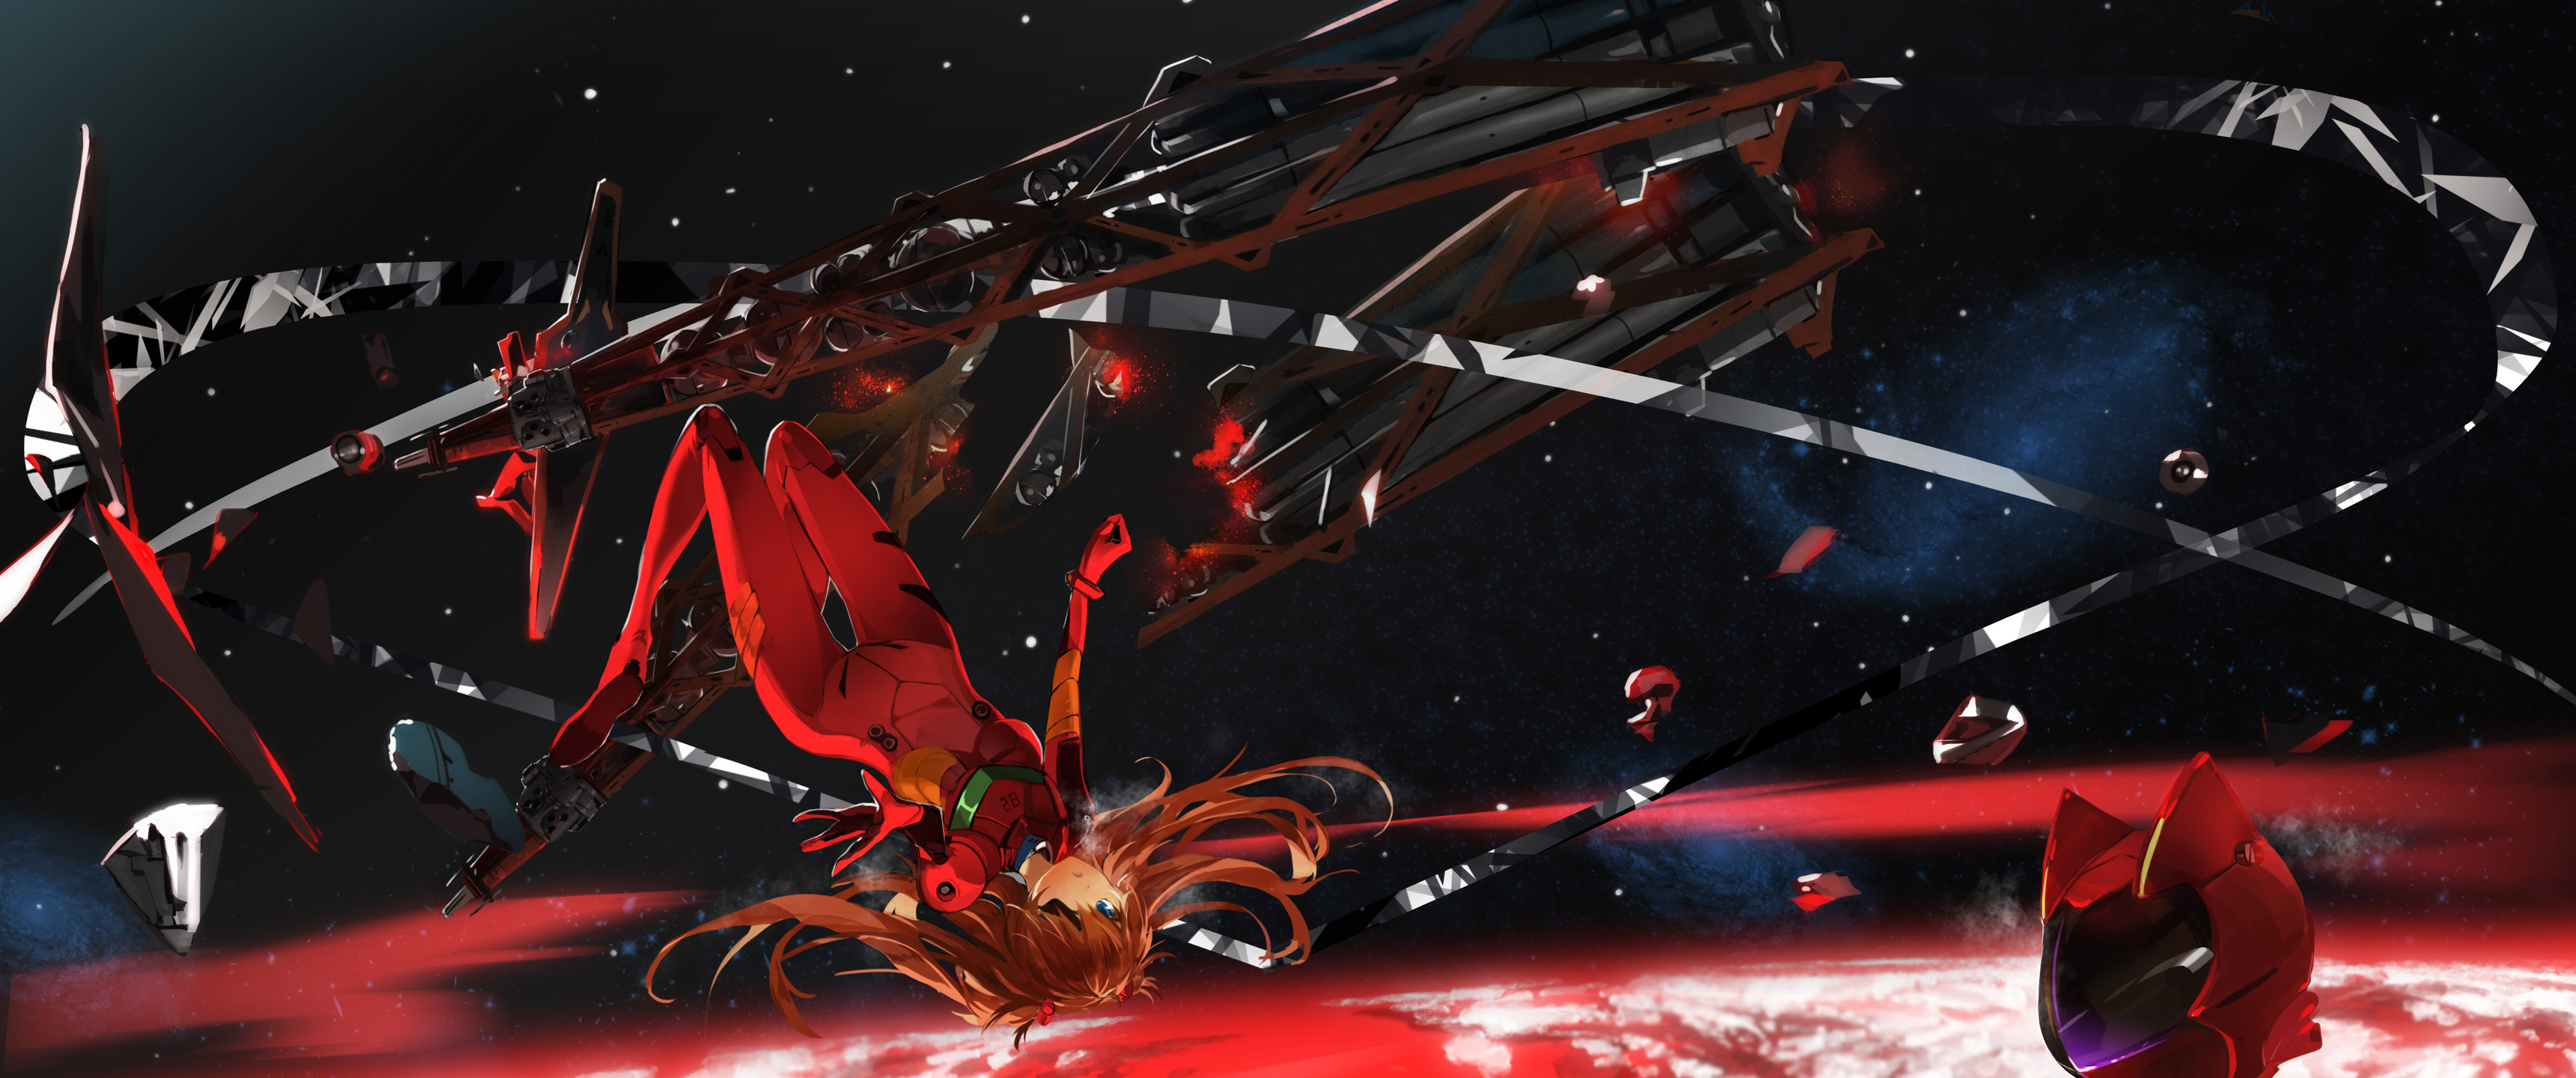 Anime Evangelion: 3.0 You Can (Not) Redo HD Wallpaper | Background Image